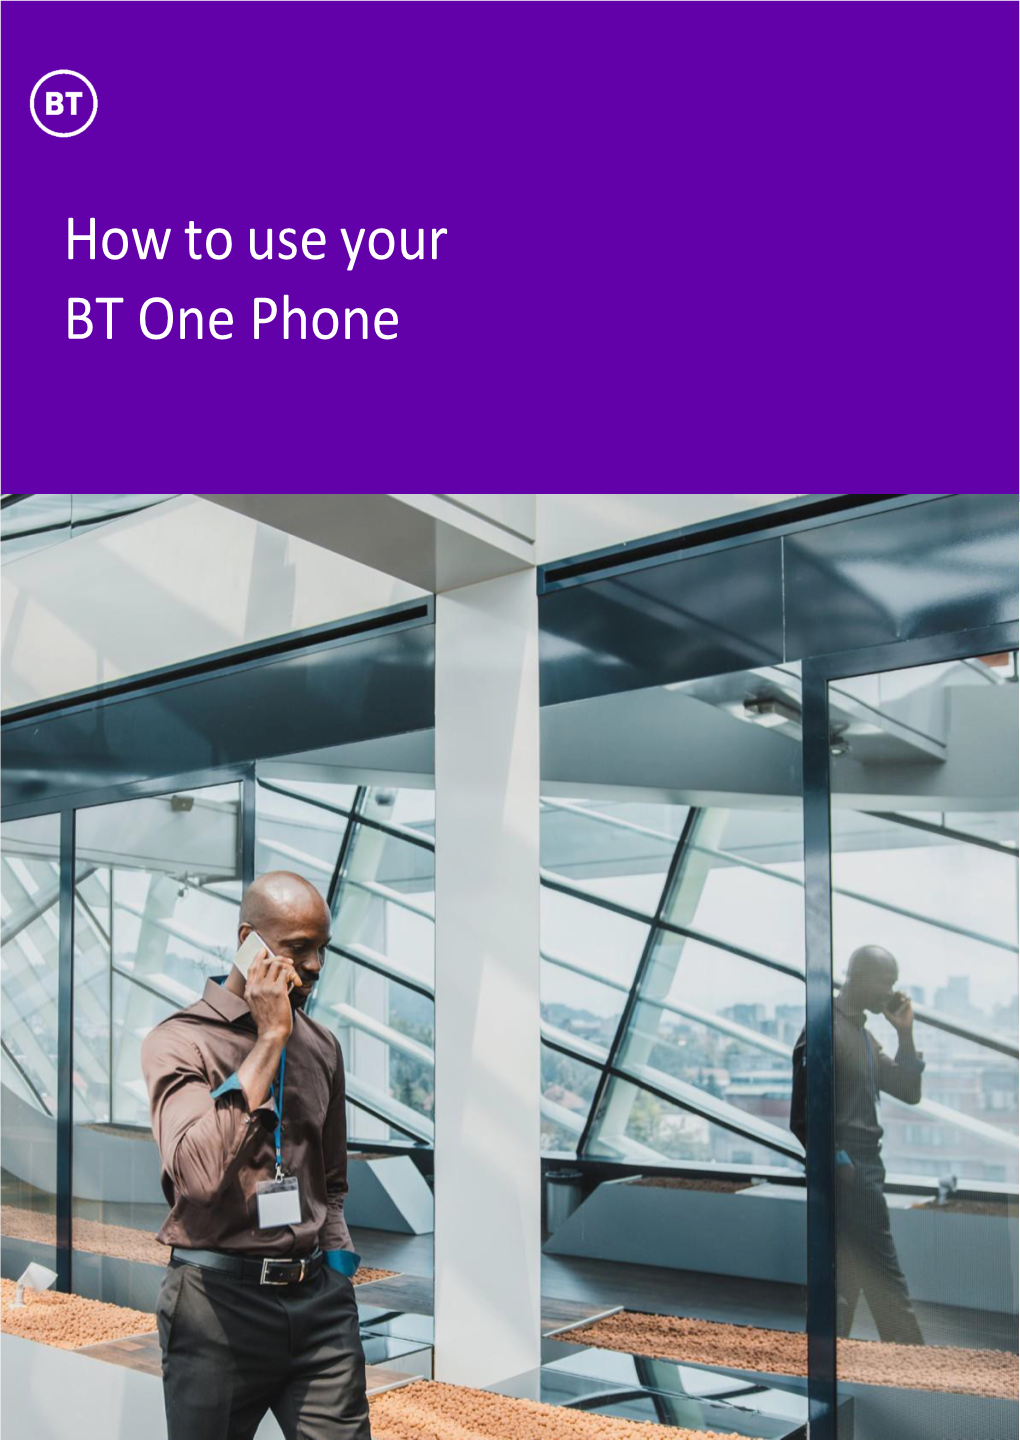 BT One Phone User Guide